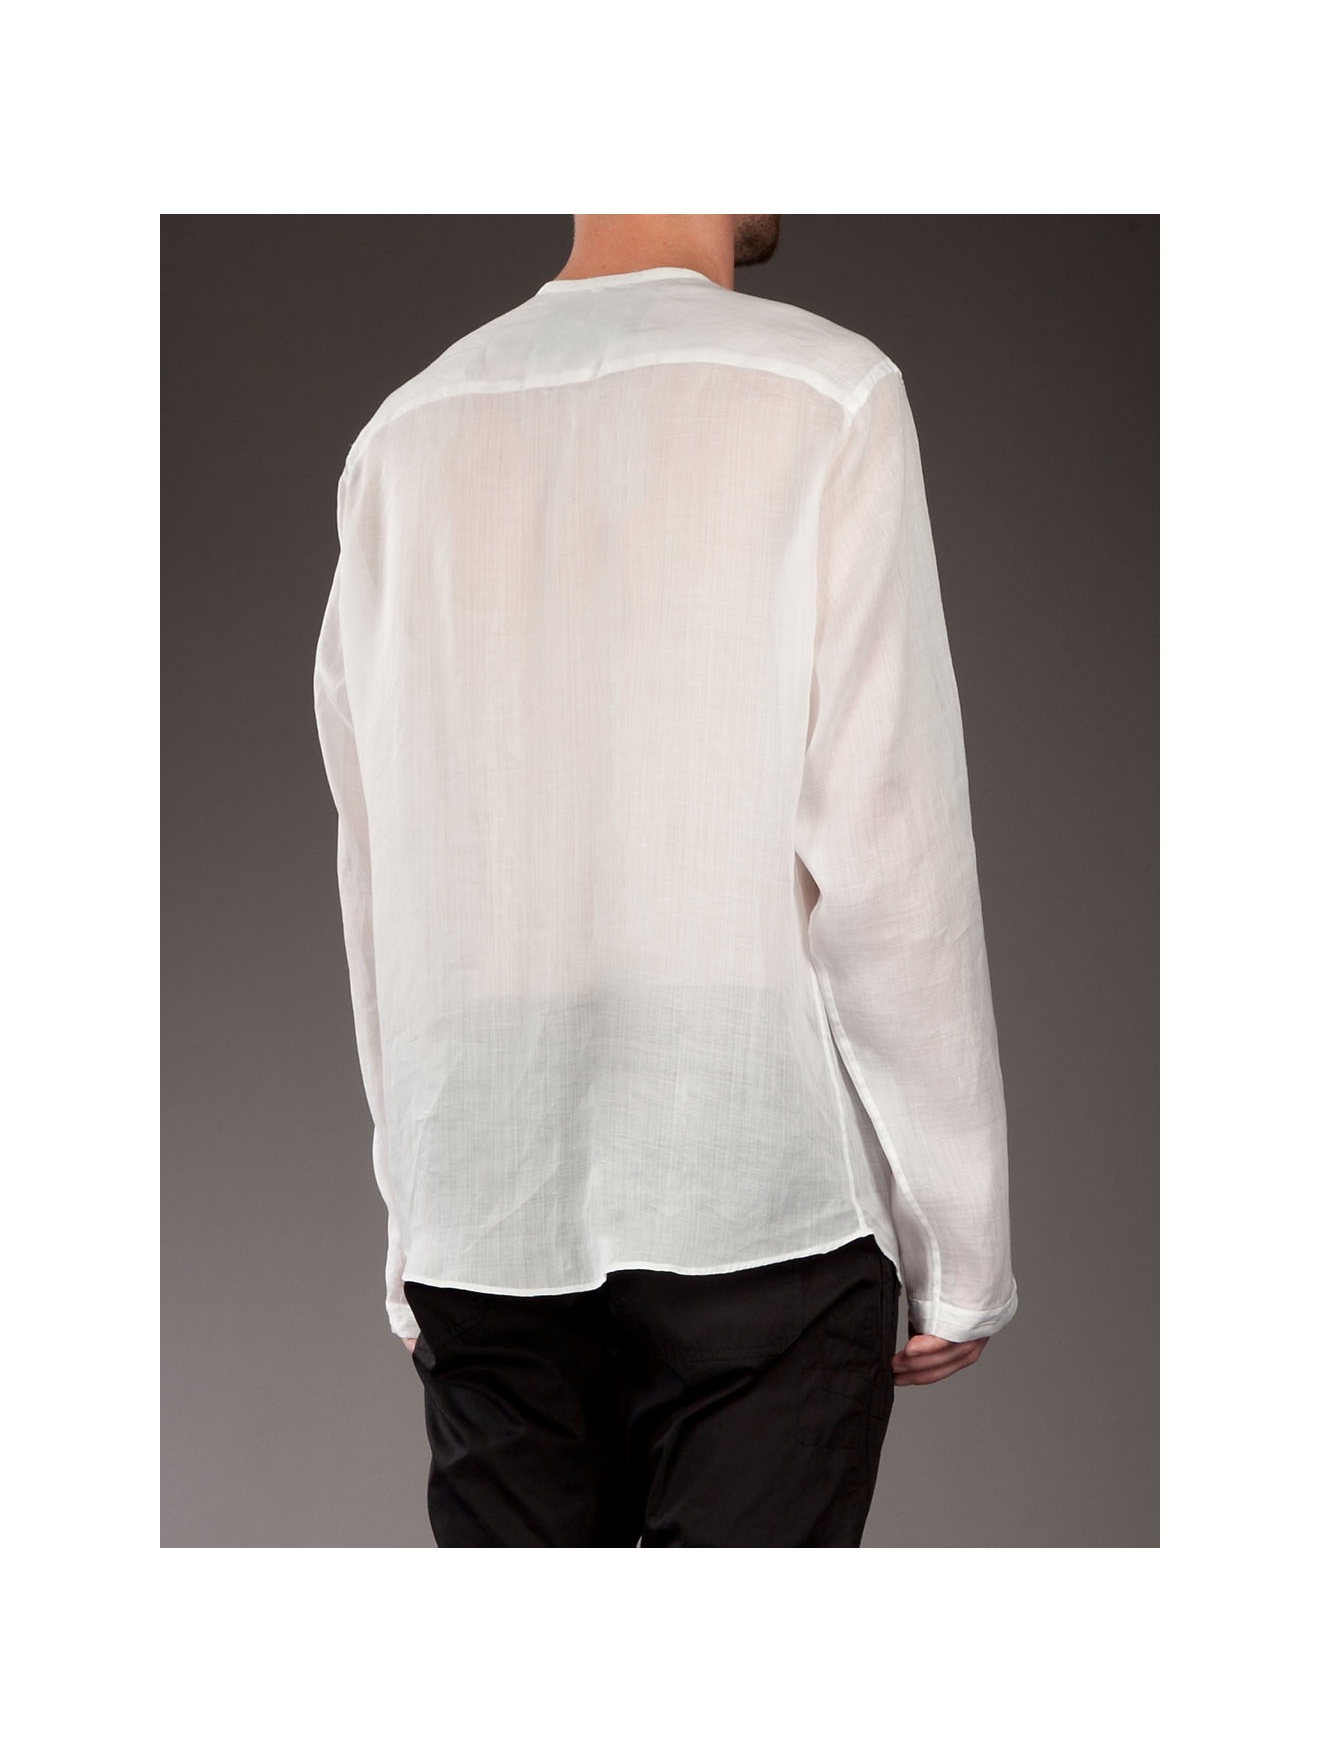 G.guaglianone Linen Collarless Shirt in White for Men | Lyst